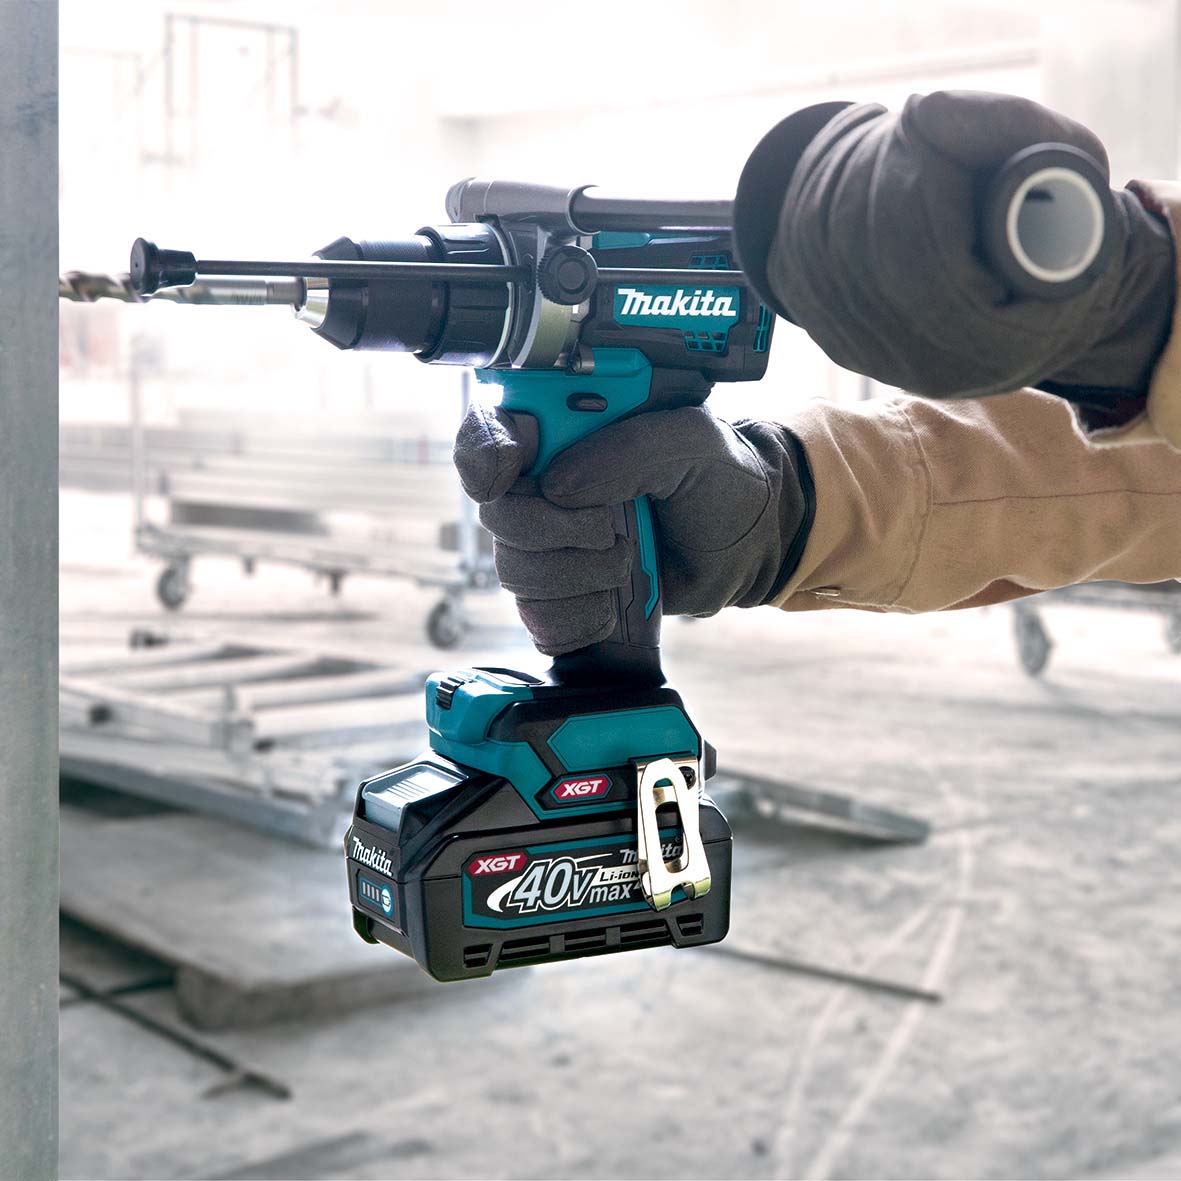 40V Brushless Hammer Driver Drill Bare (Tool Only) HP001GZ by Makita